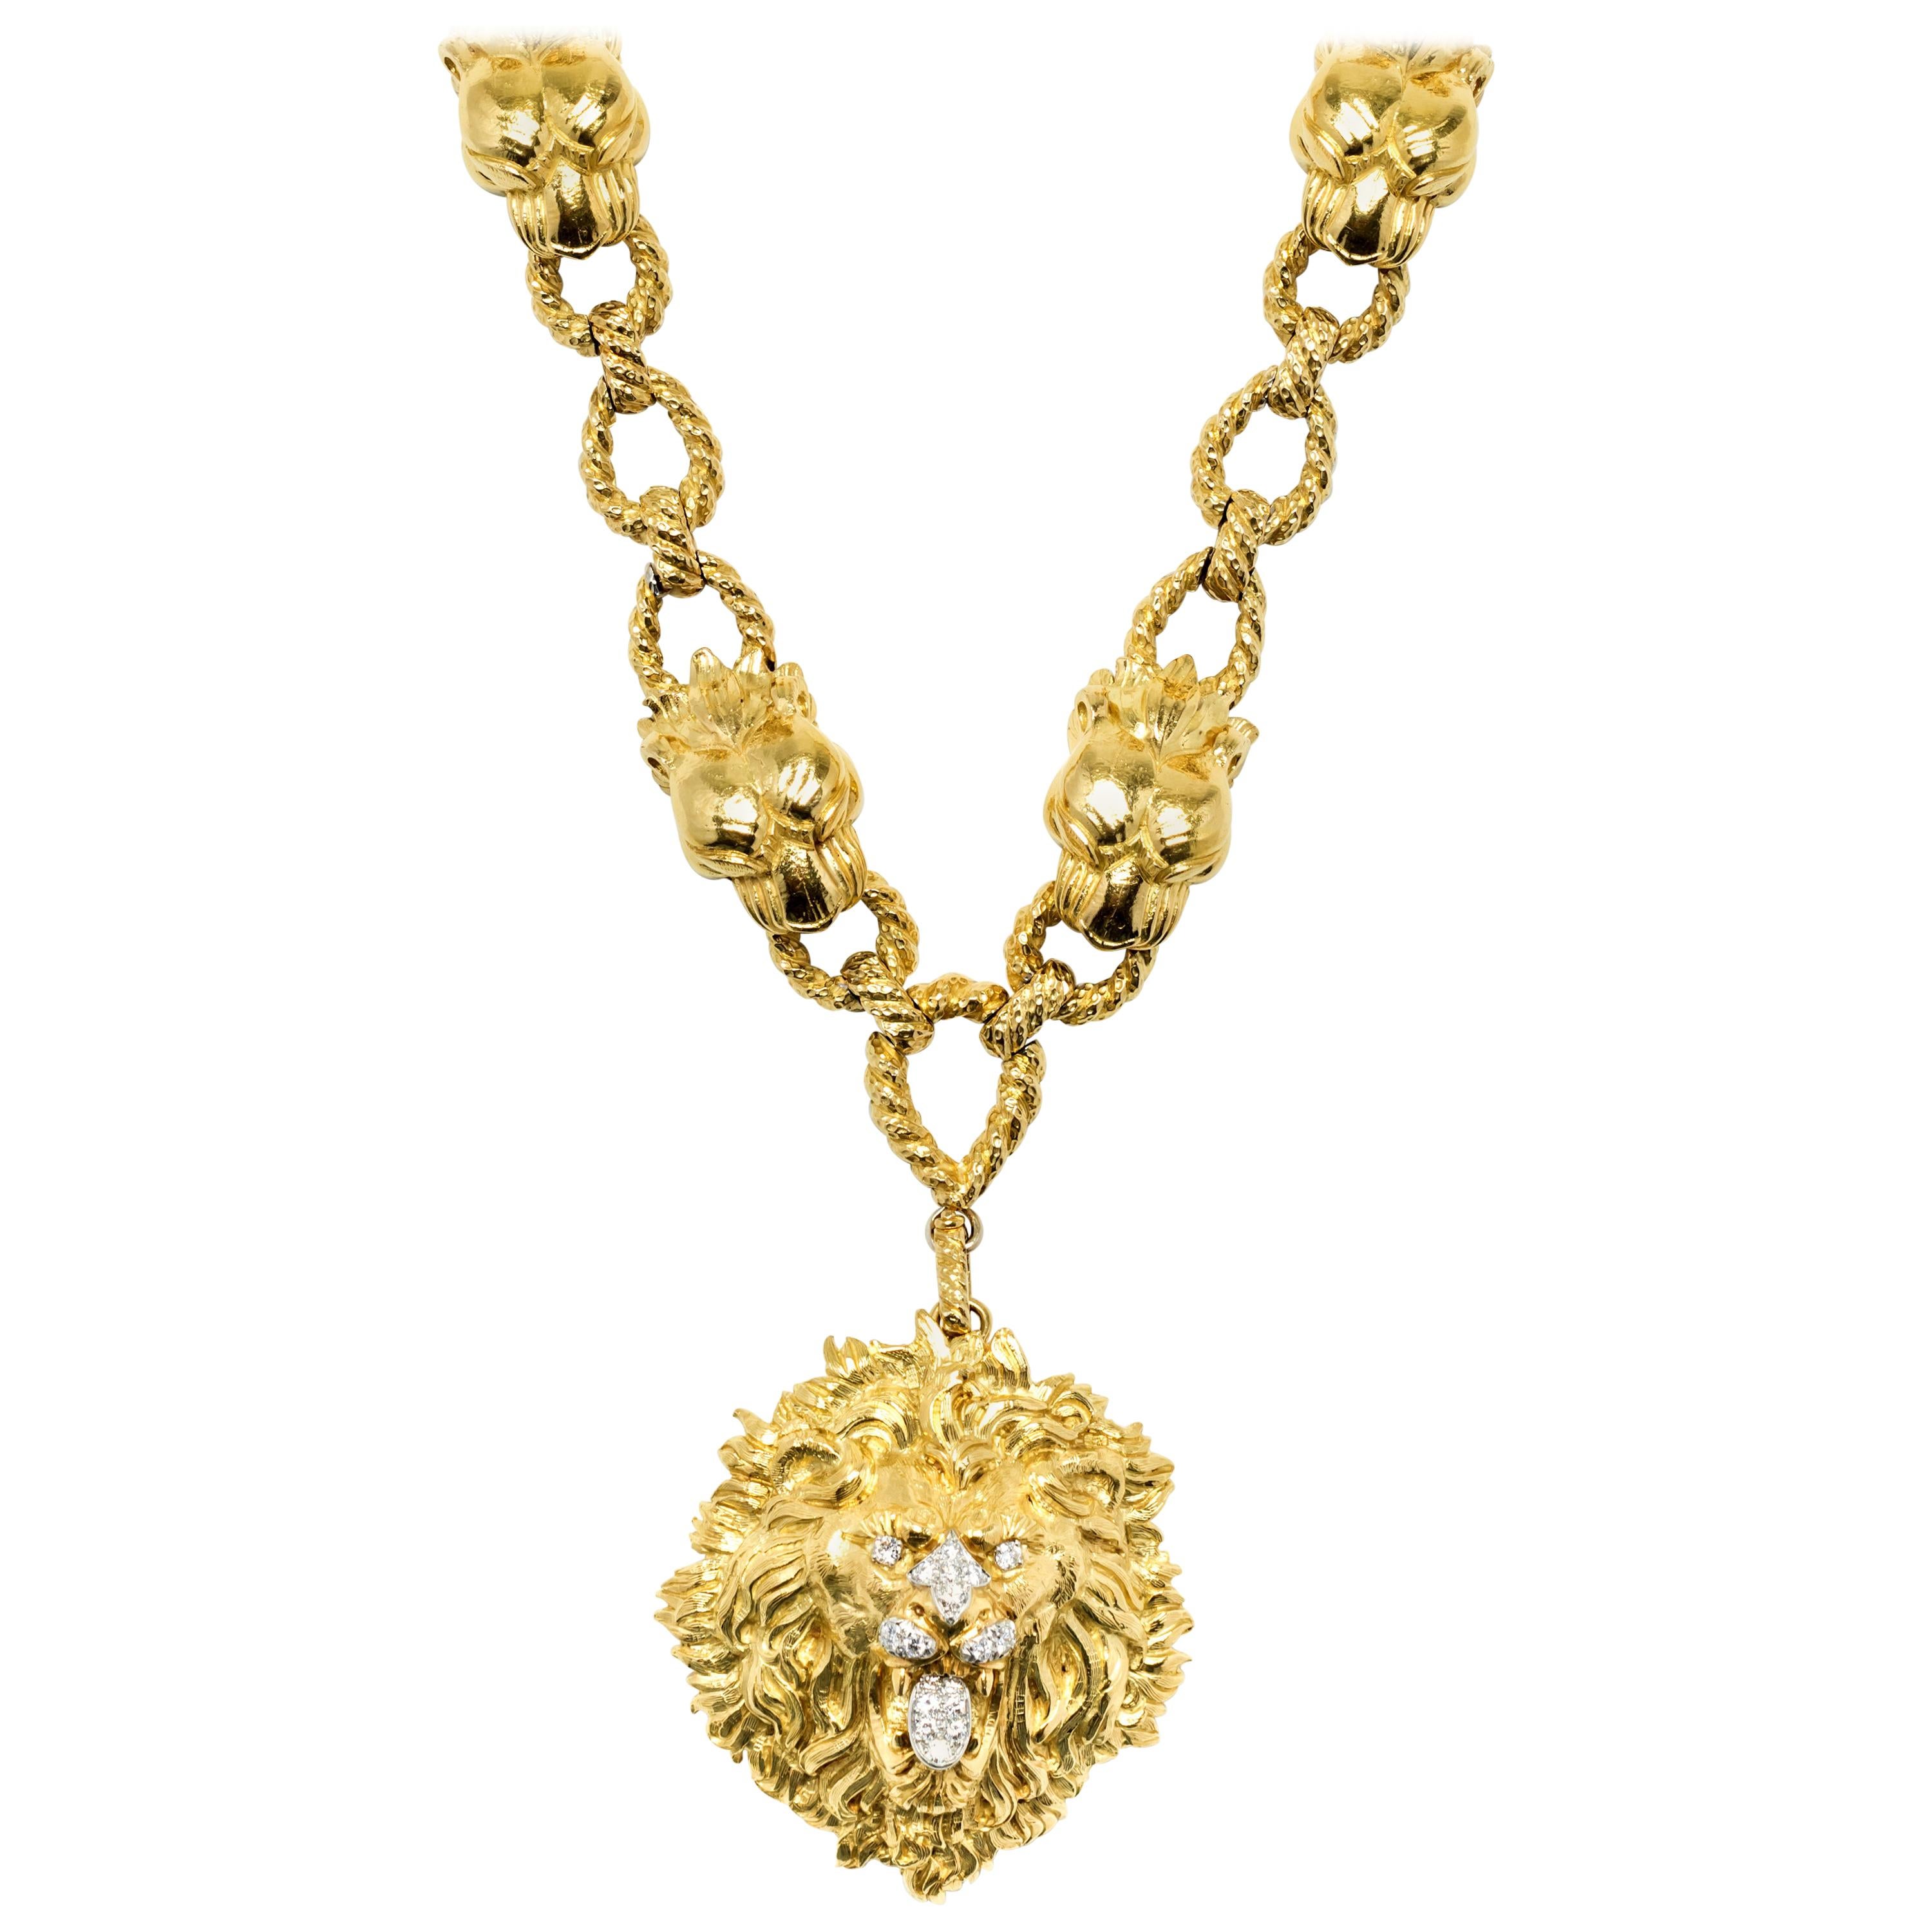 David Webb Platinum and 18K Yellow Gold Liberty Head Coin Necklace